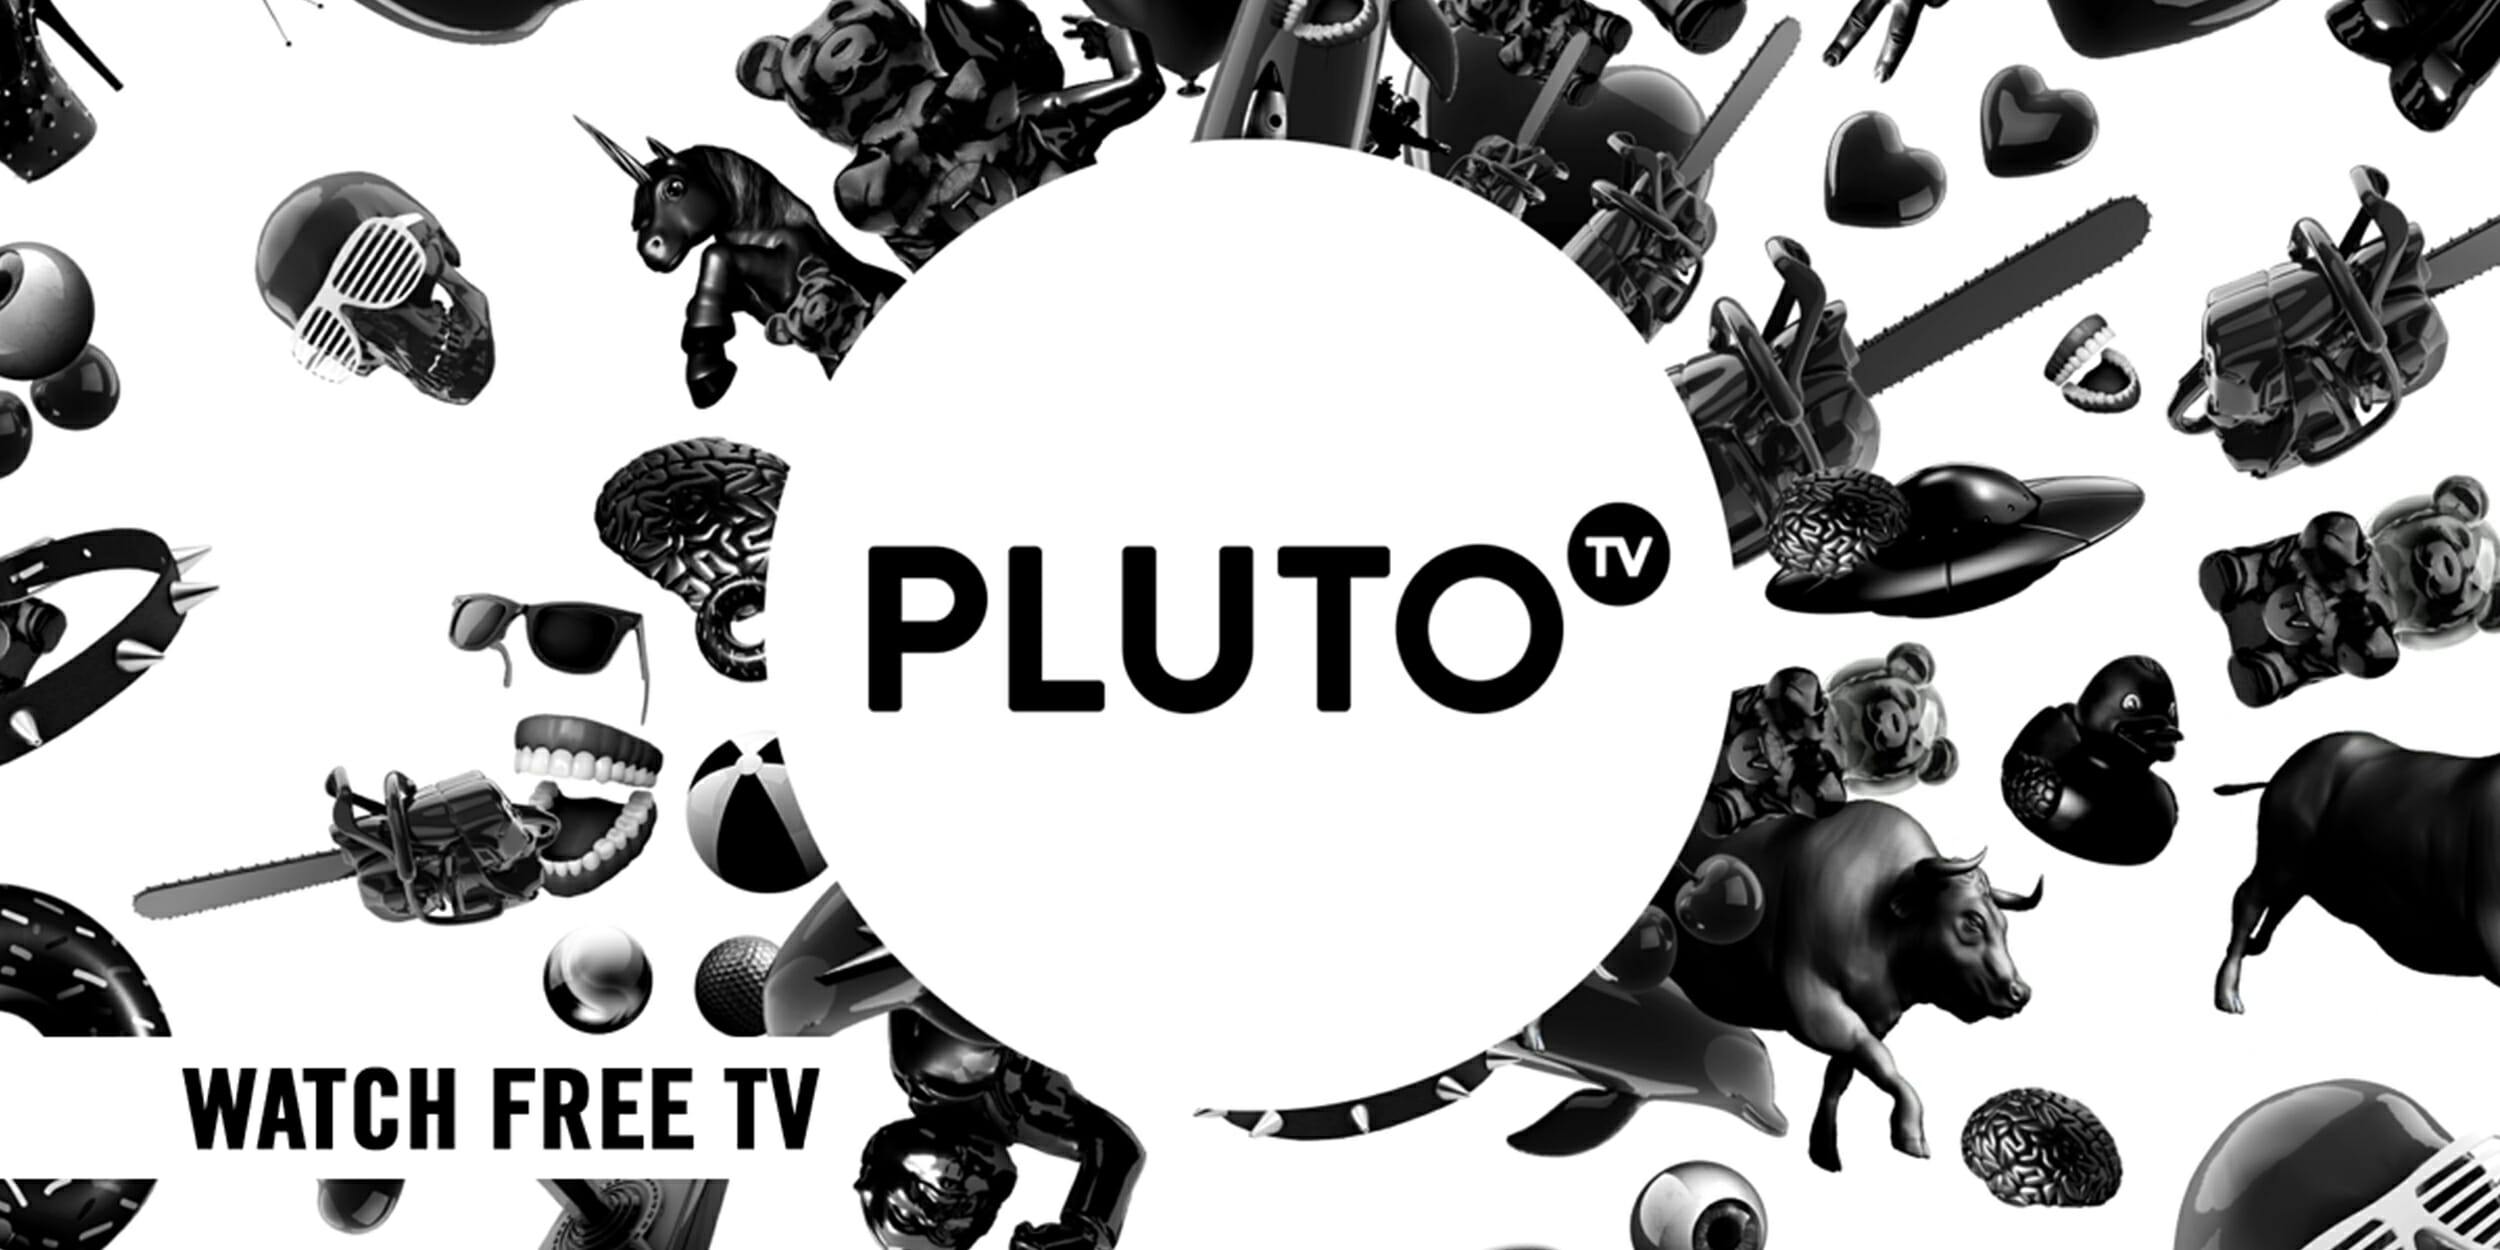 What Is Pluto Tv New Pluto Channels Devices And Free Live Tv